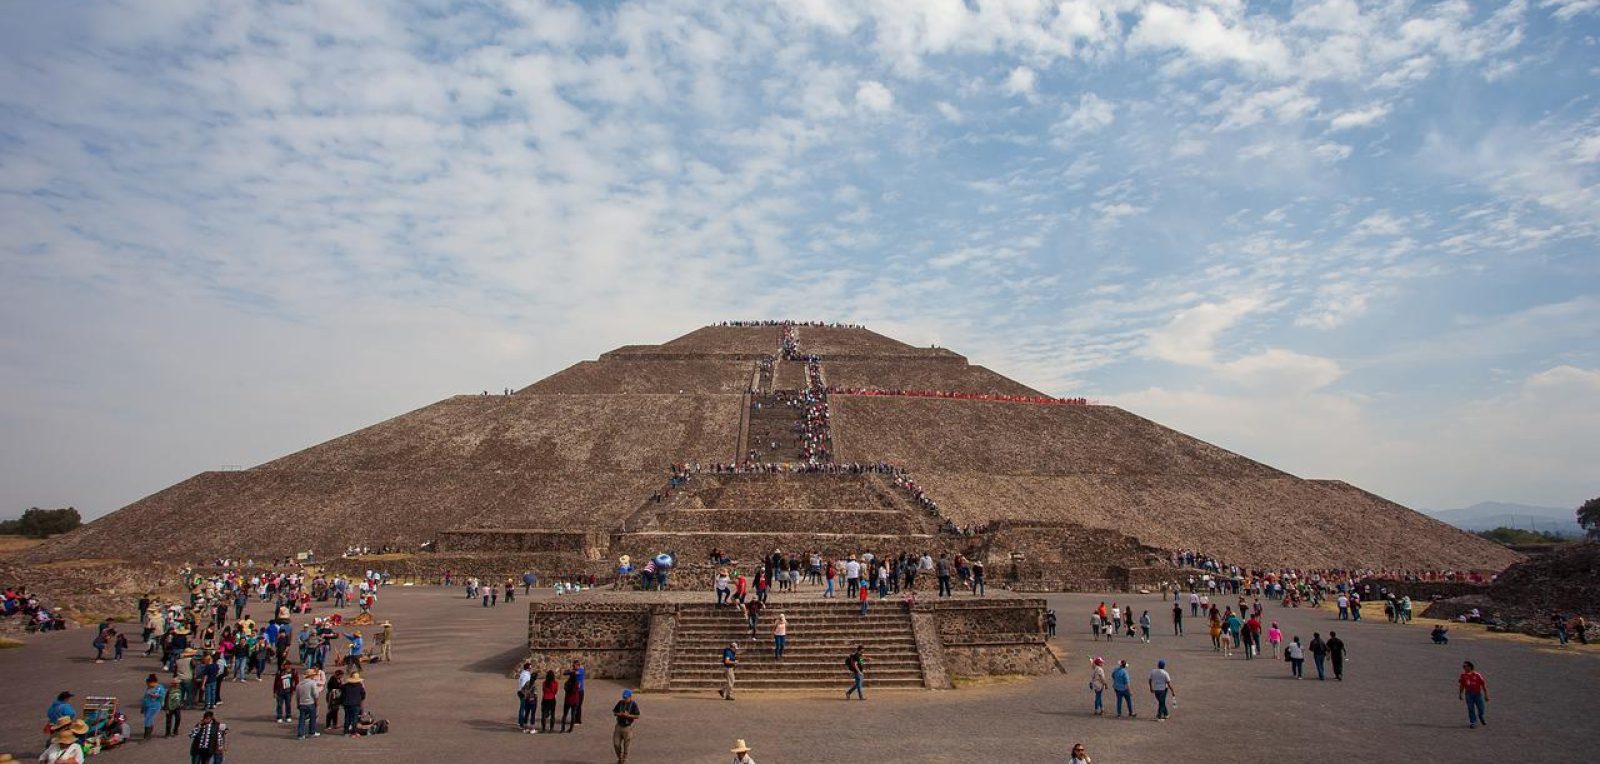 A pyramid in Teotihuacan visited by many tourists on a sunny day